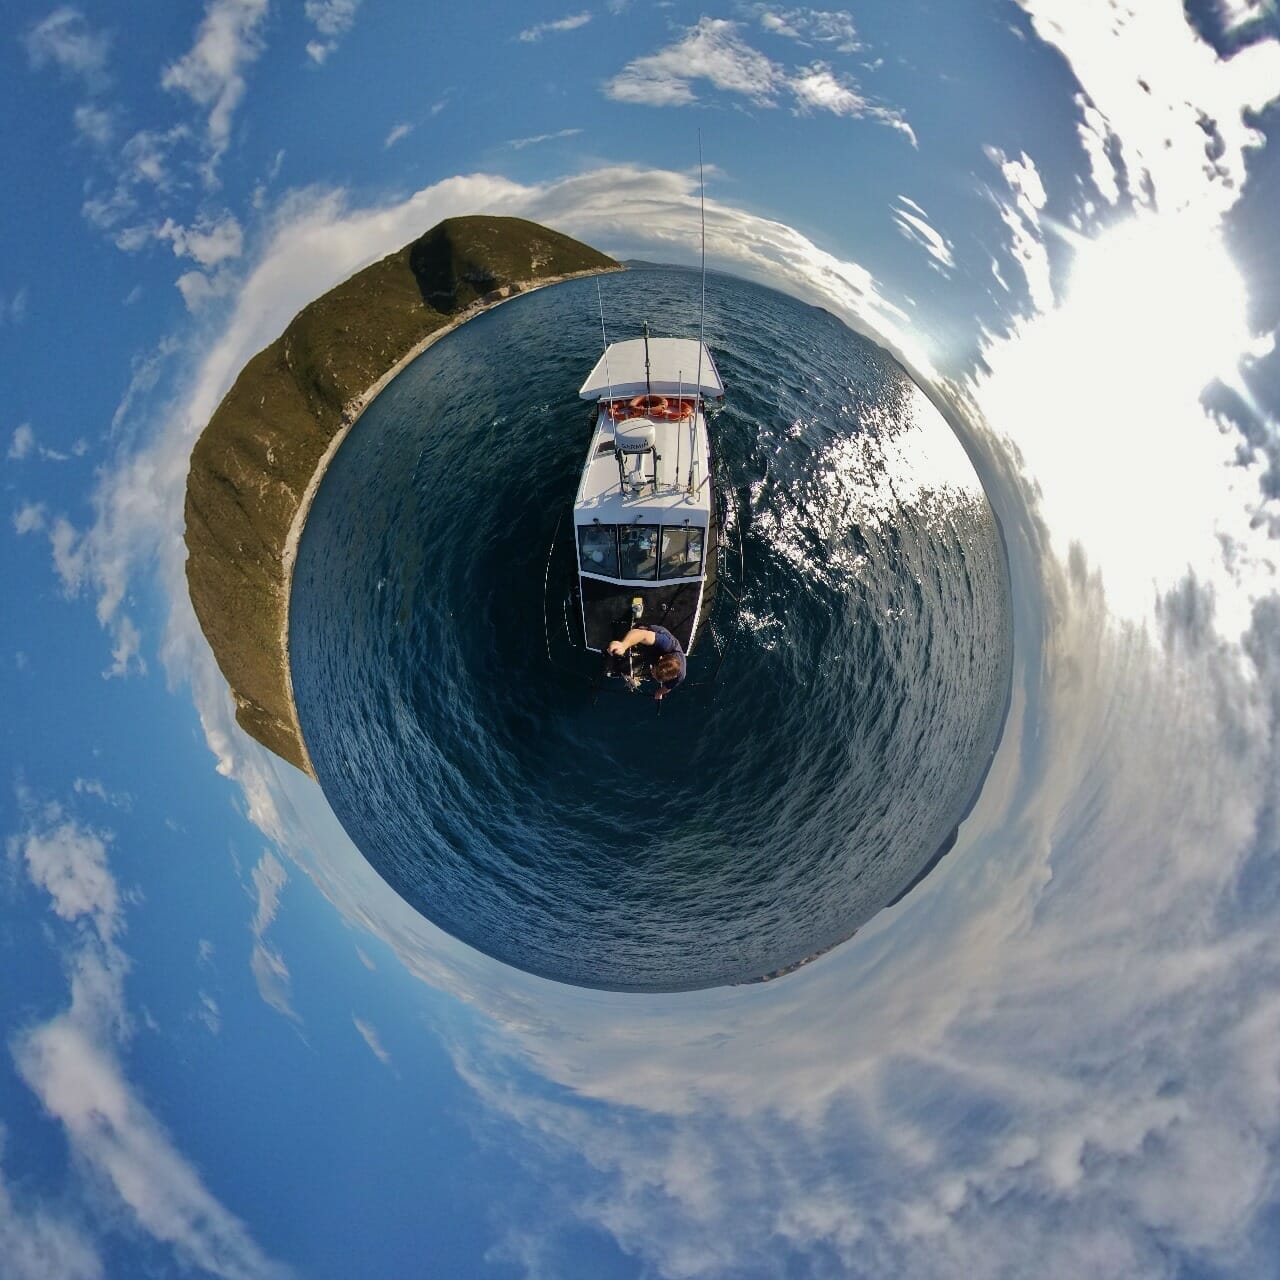 360 degree view of the Young Salty Dog and Bald Head, Albany